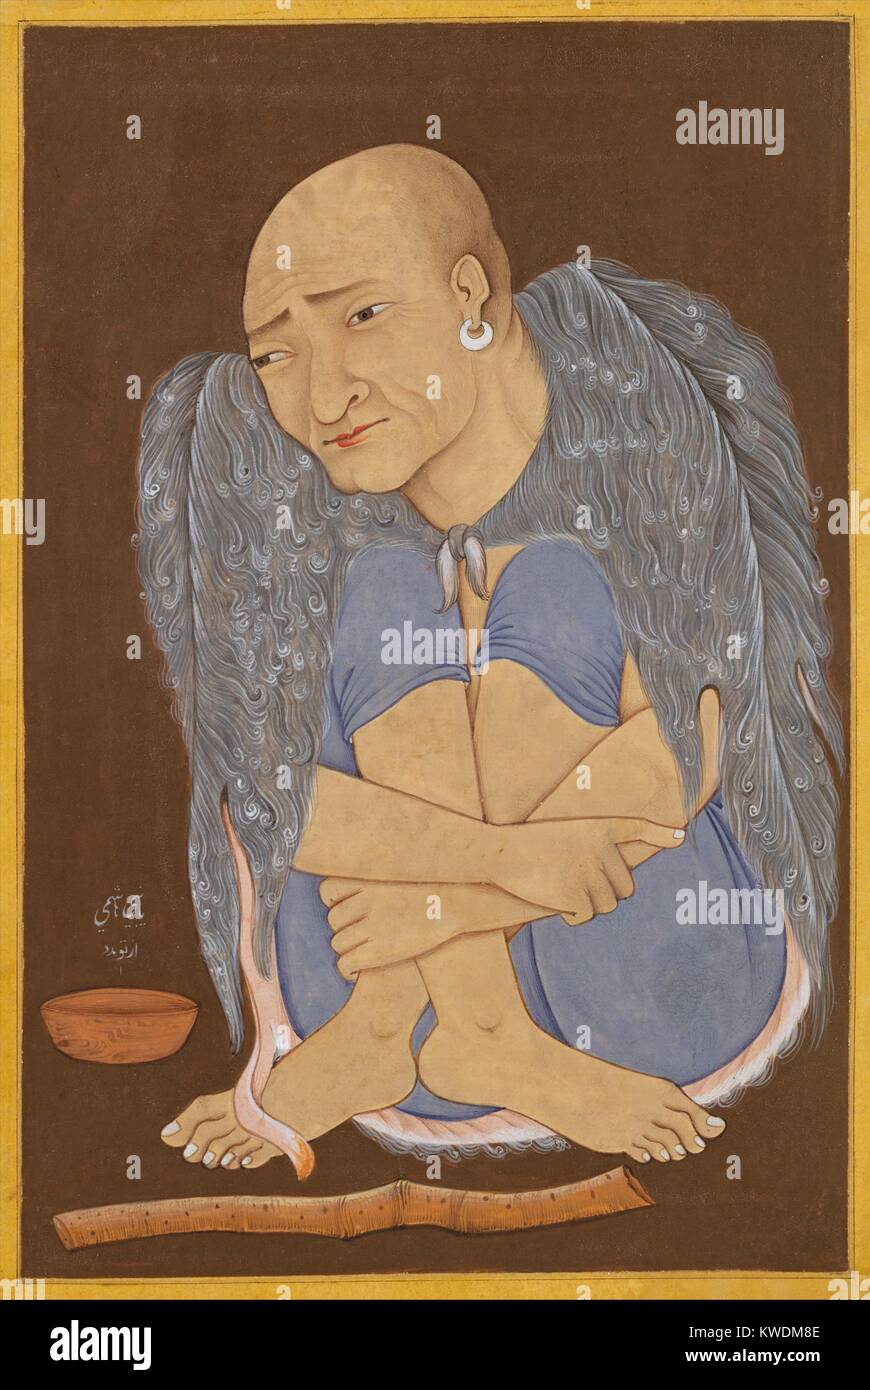 PORTRAIT OF A SUFI, Indian, Mughal painting, 1600-1620s, ink, opaque watercolor, gold on paper. Sufis were Muslim mystics who renounced the material world. In a meditative posture, he is dressed in rough fur, has an alms bowl, and a flute (BSLOC 2017 16 31) Stock Photo